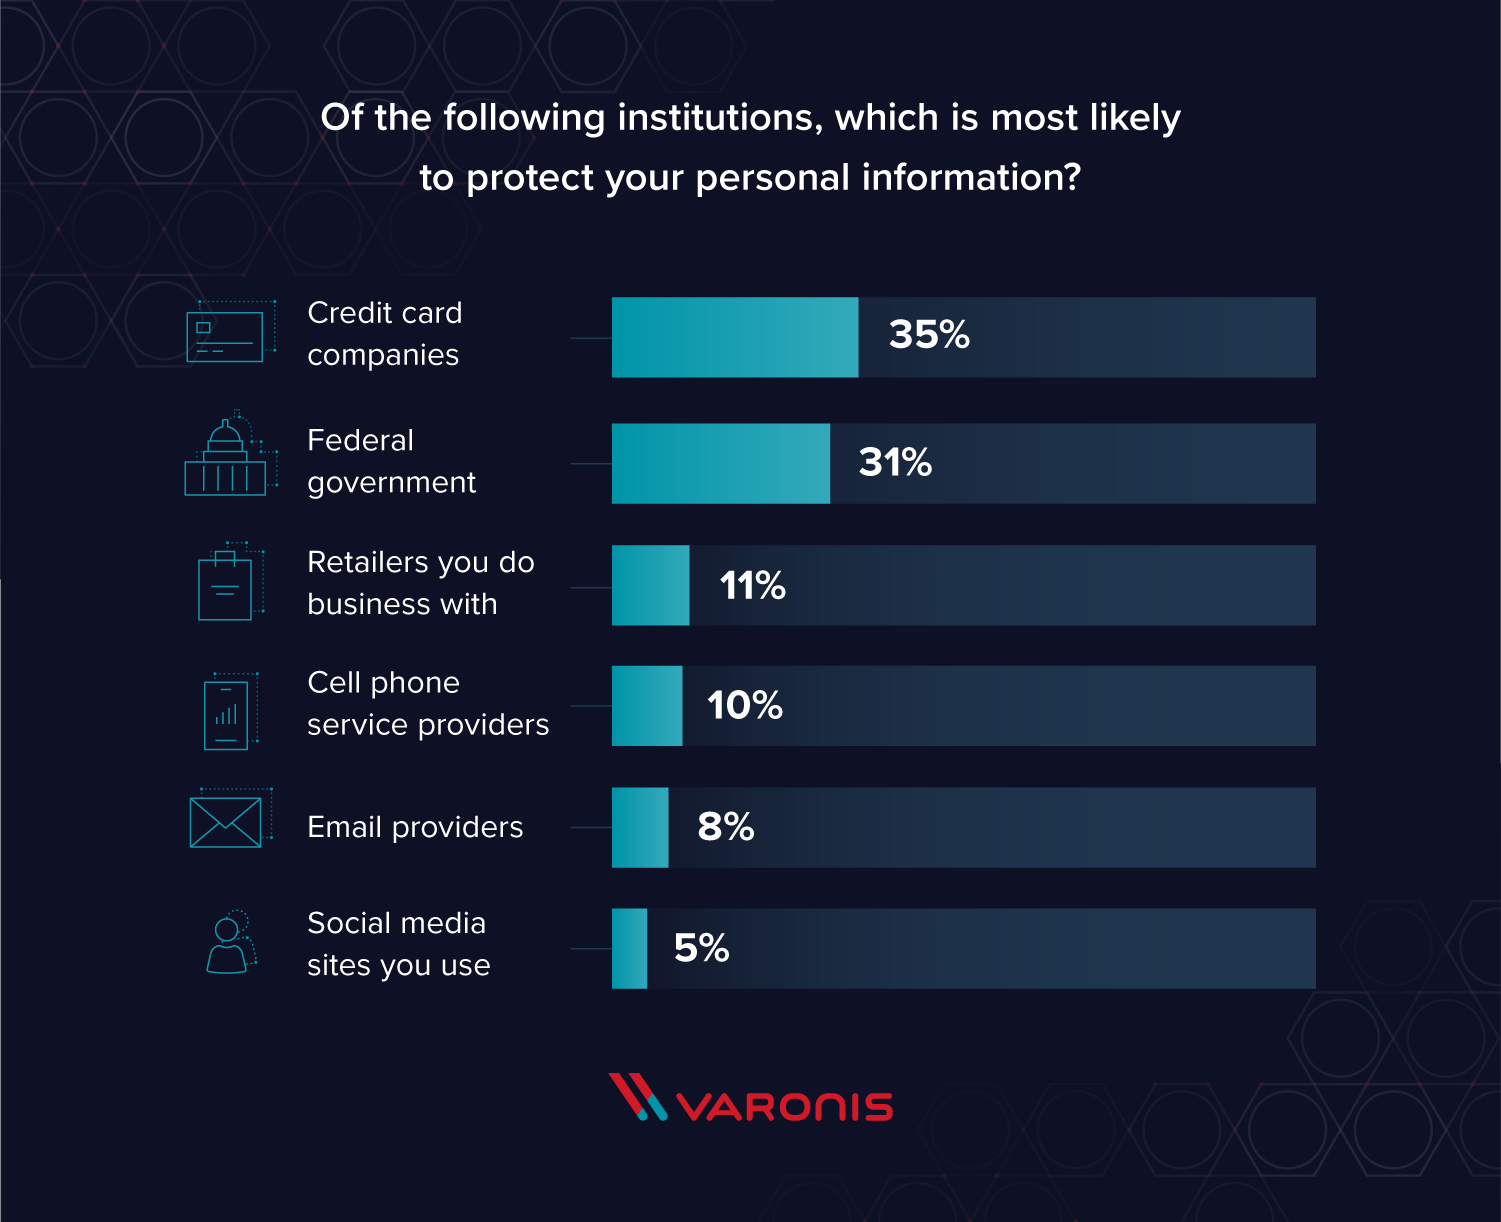 results which institution is most likely to protect your personal information